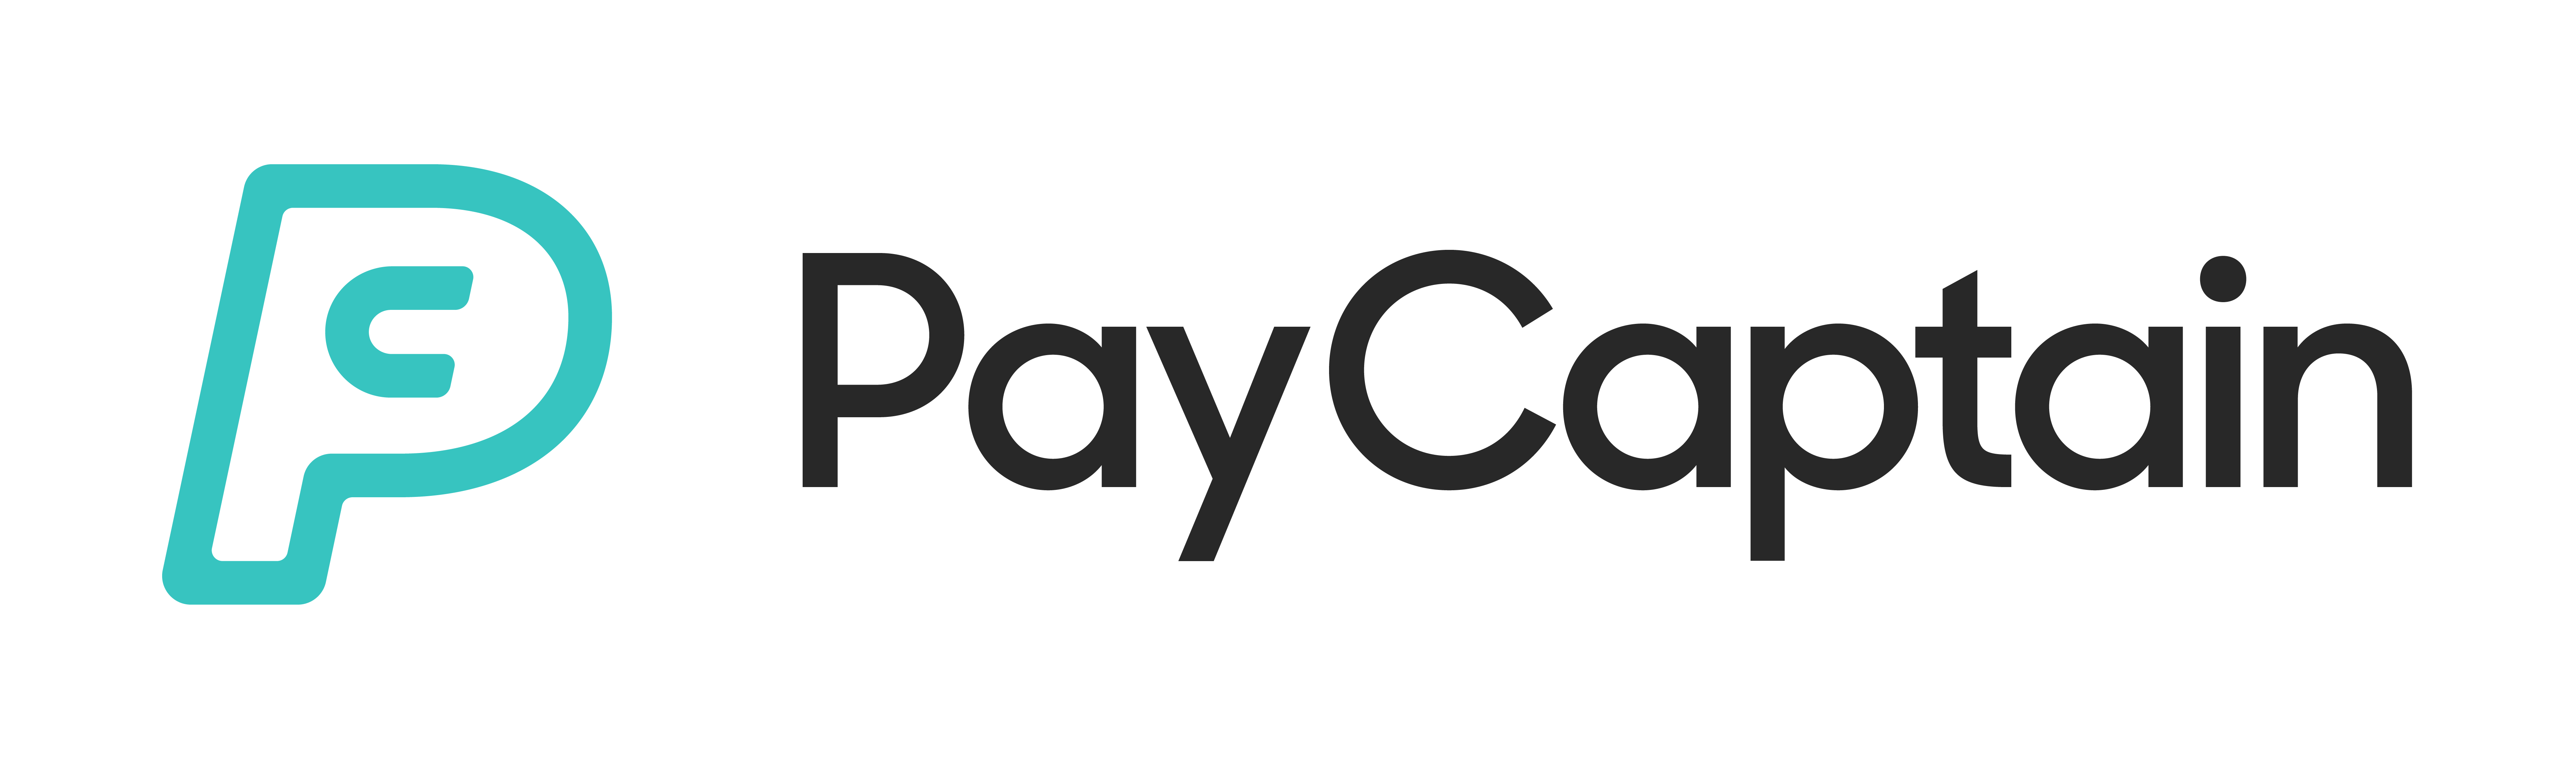 logo for PayCaptain